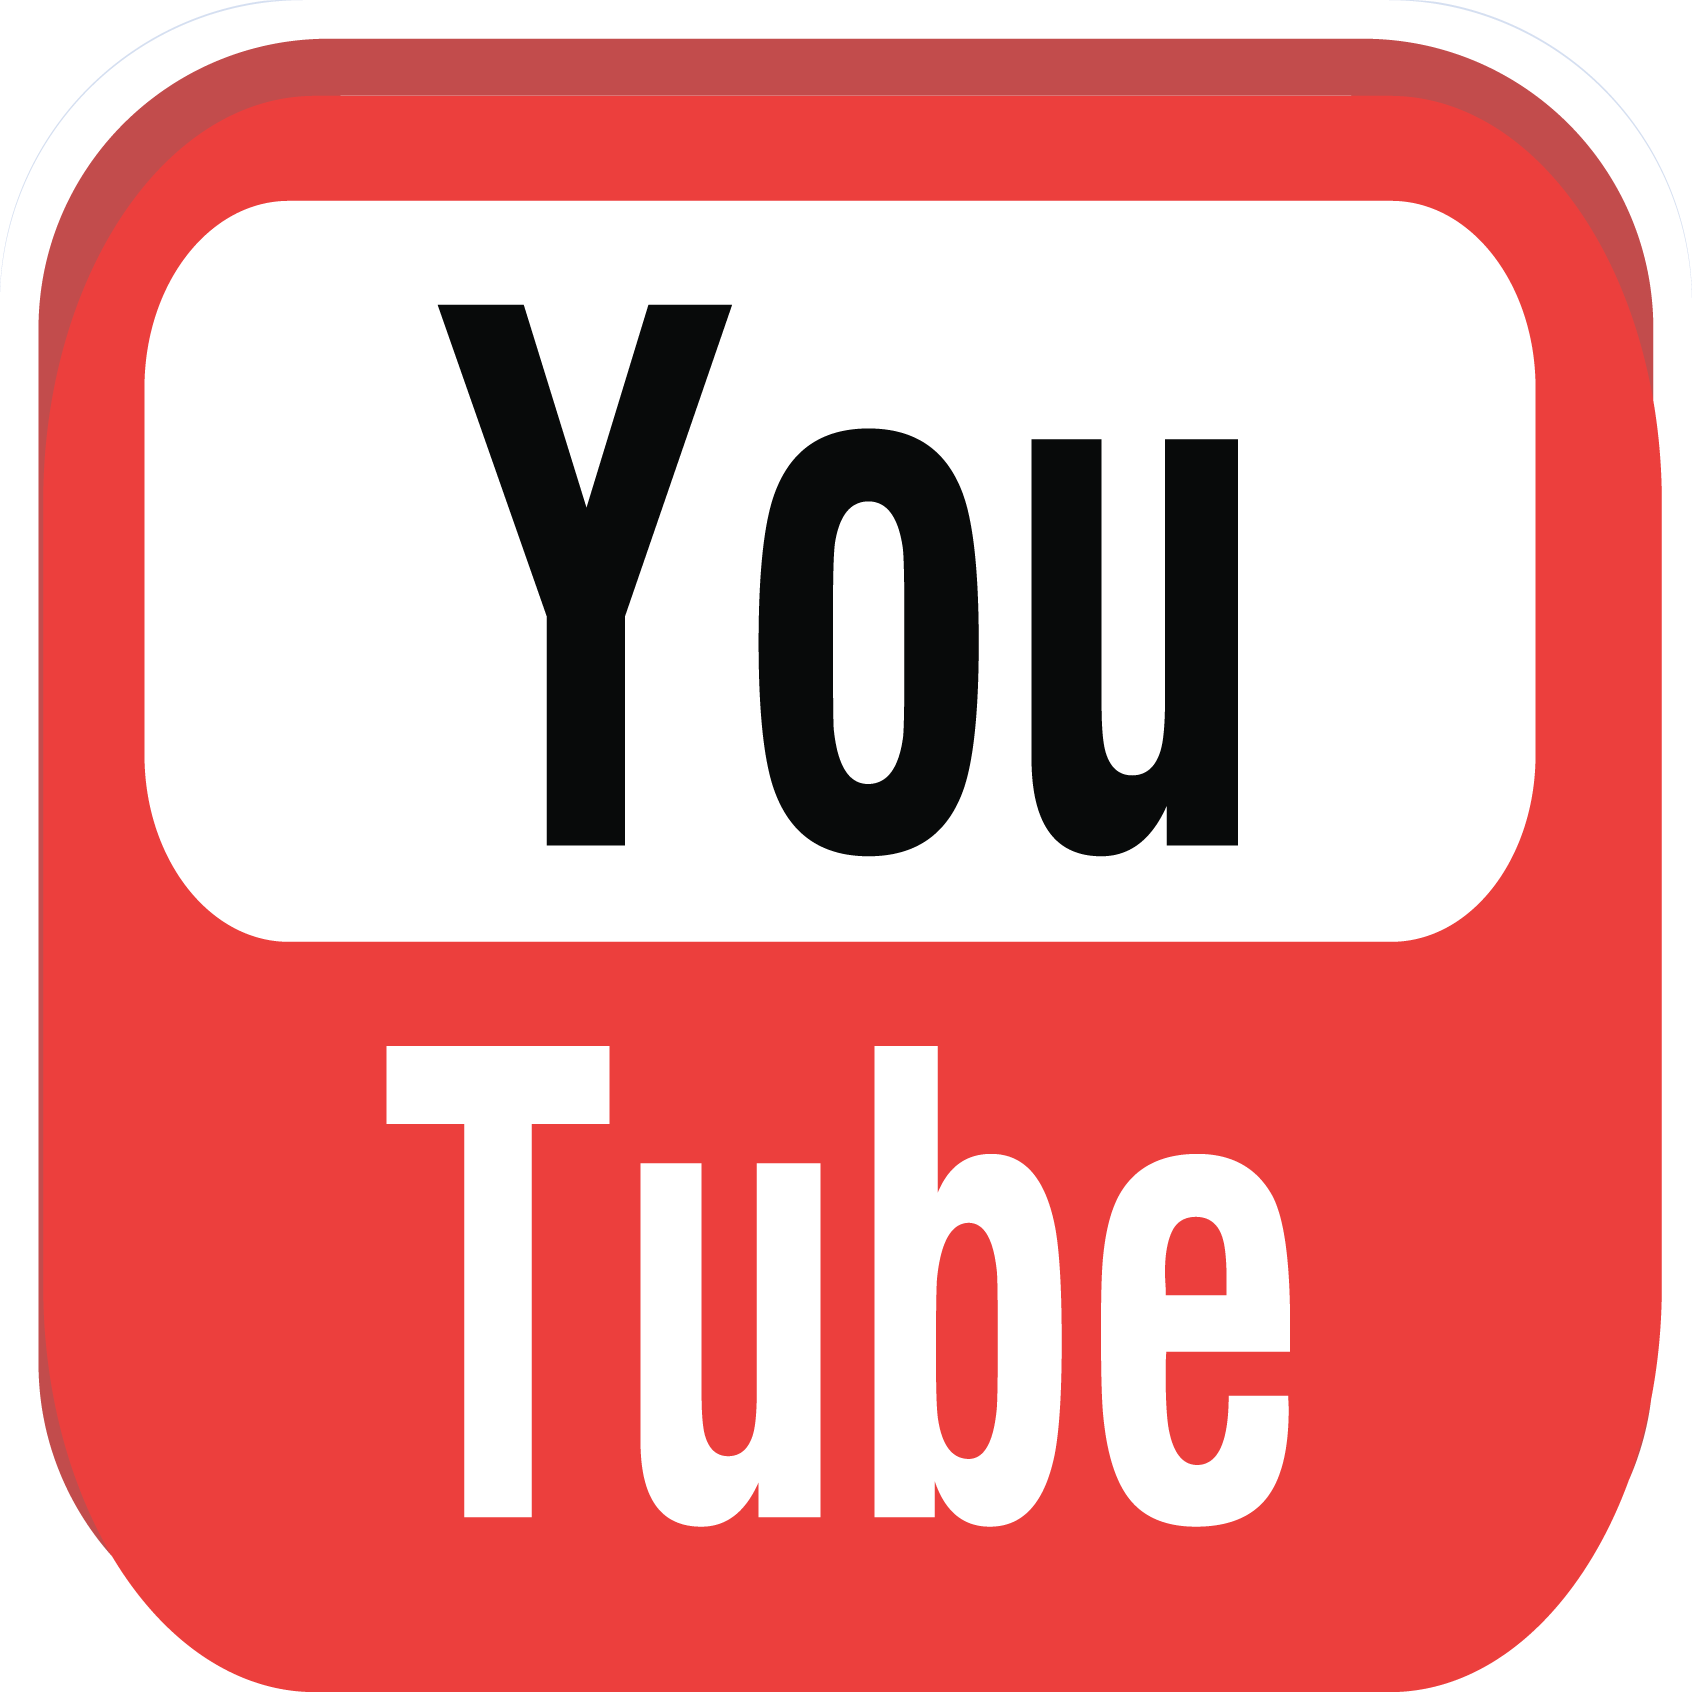 Youtube PNG images free download.